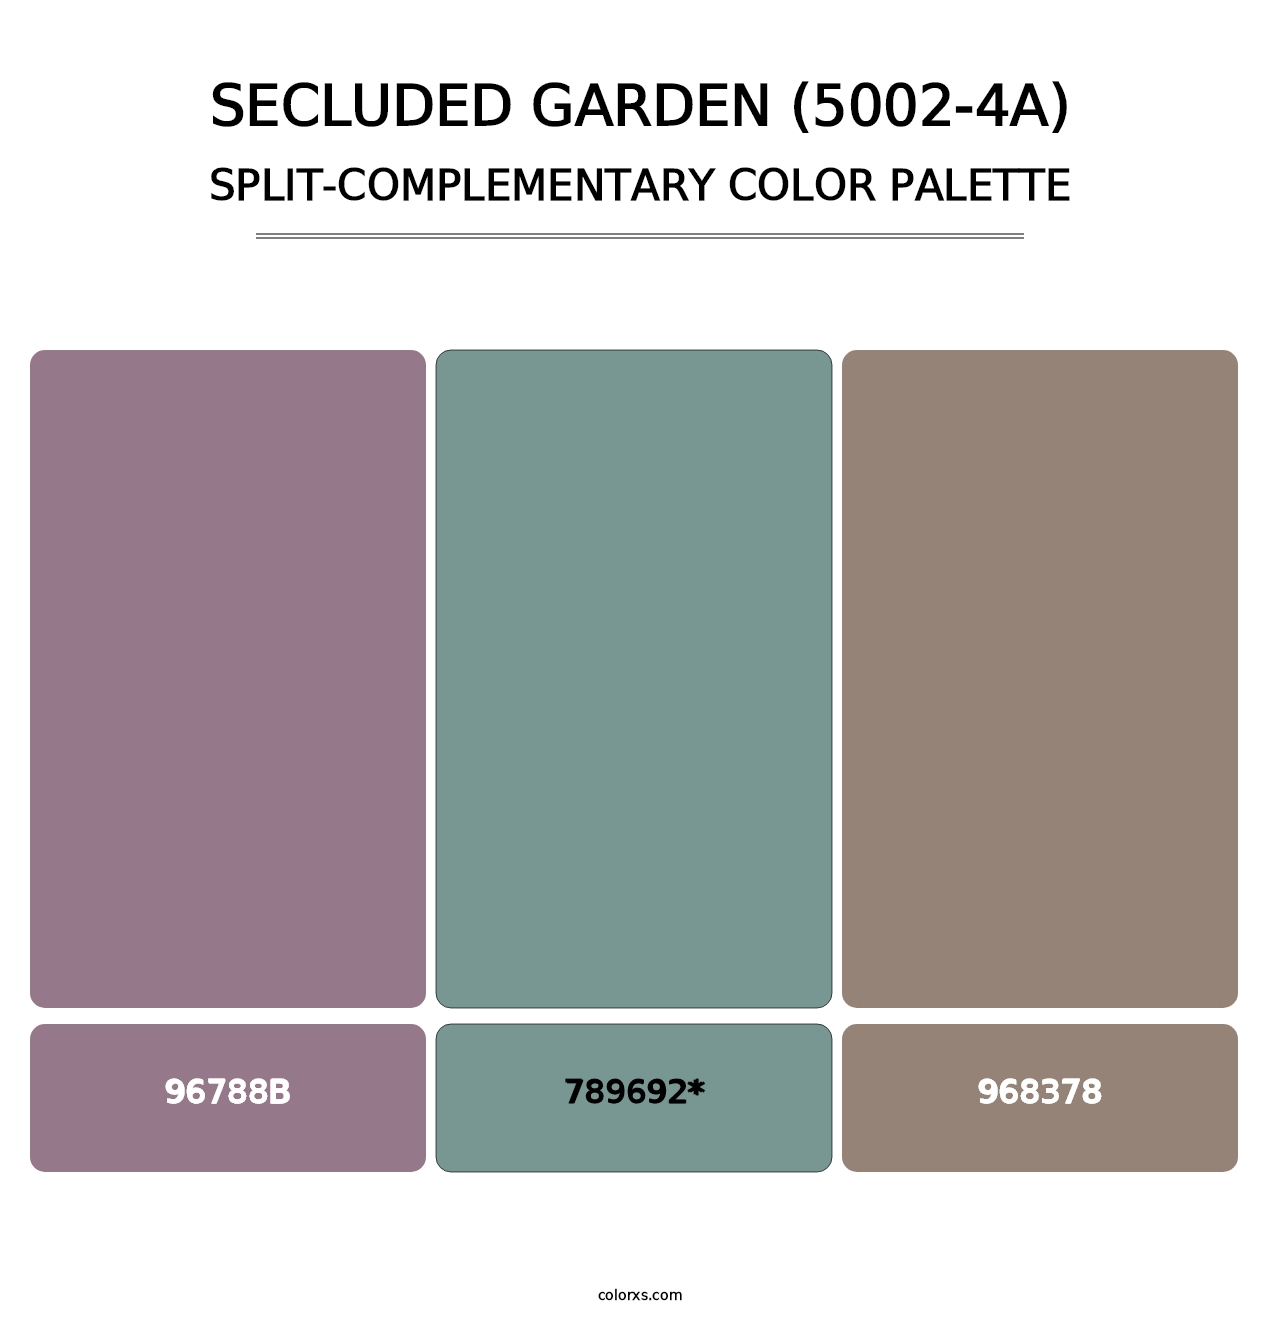 Secluded Garden (5002-4A) - Split-Complementary Color Palette